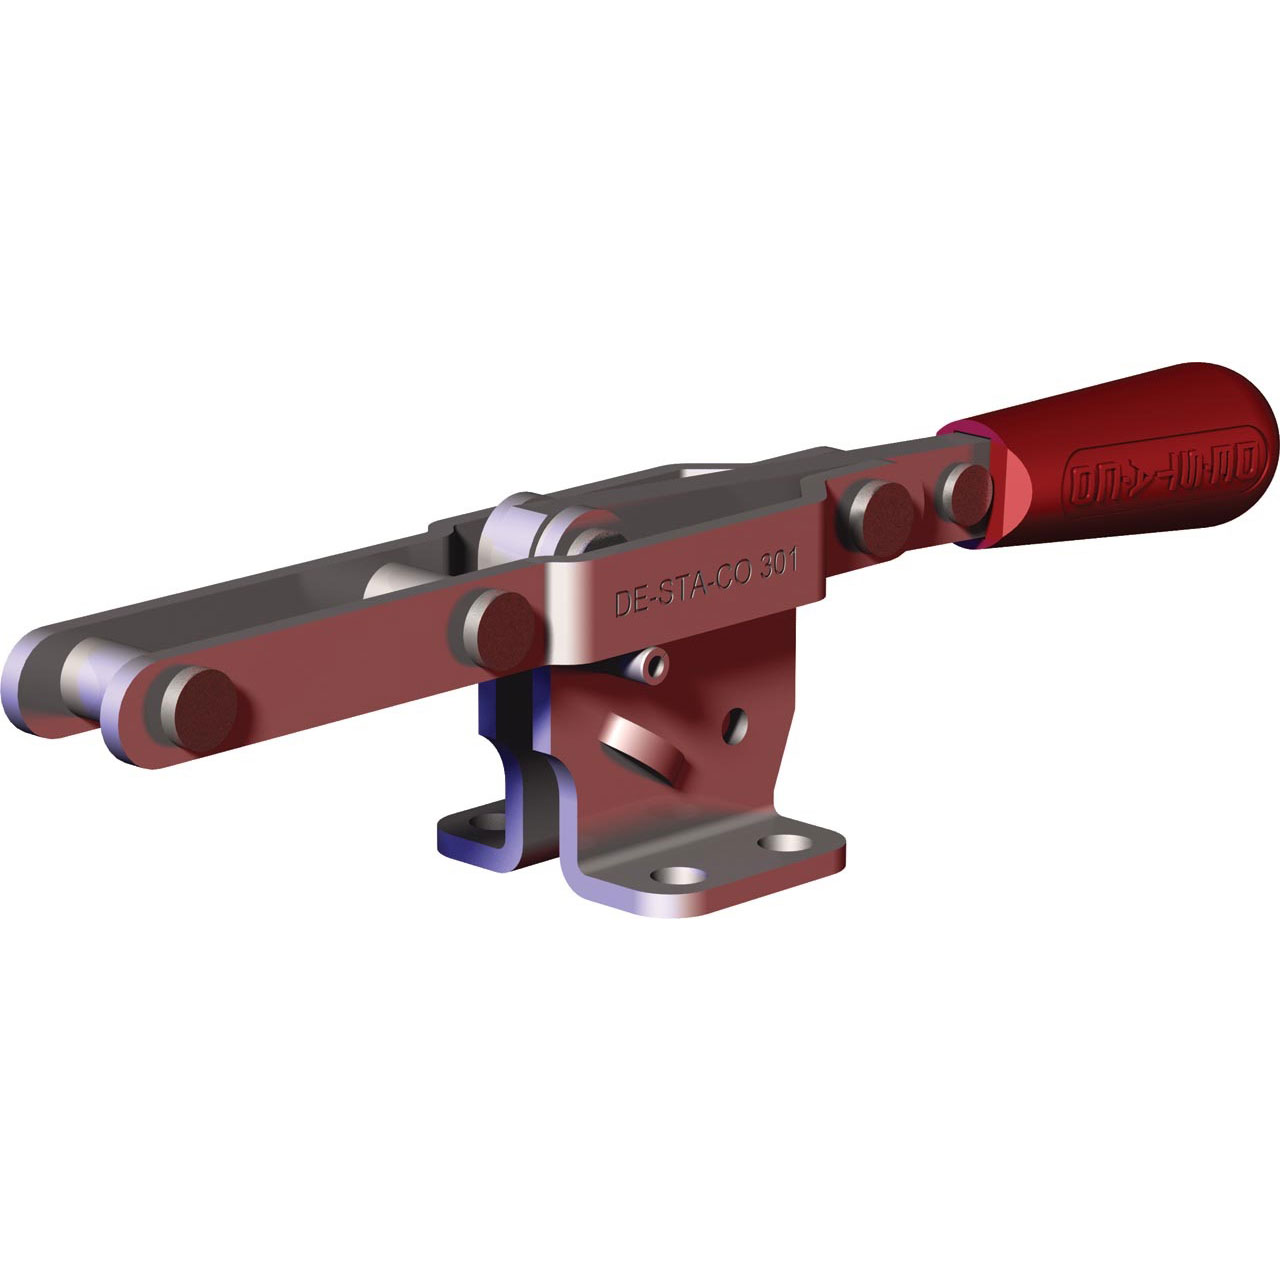 Destaco pull action latch clamps 301-311 series